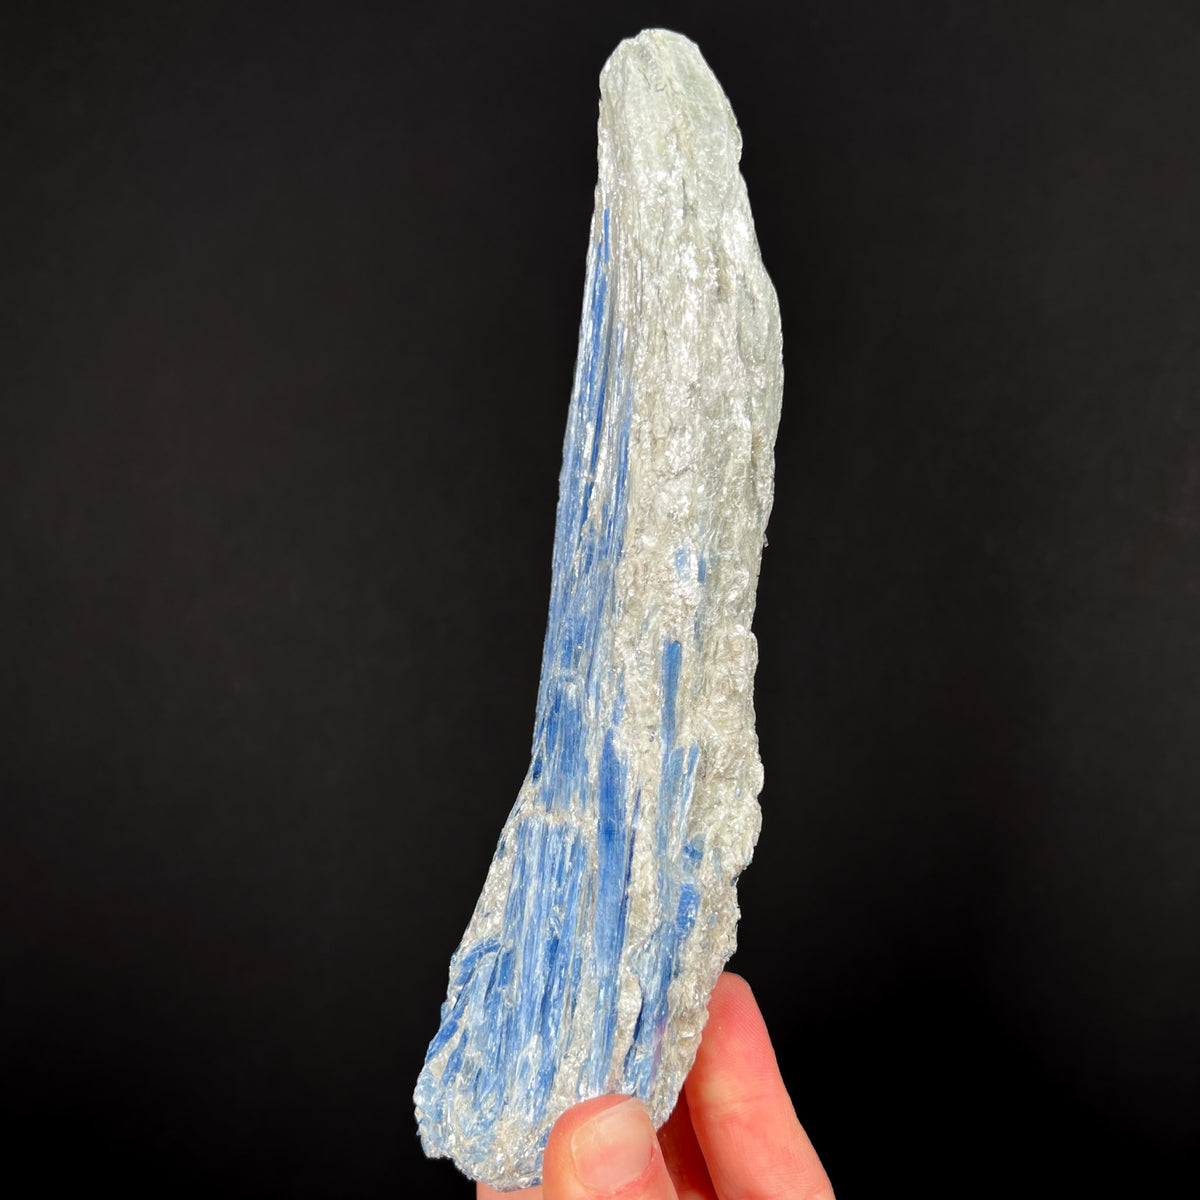 Side View of Large Blue Kyanite Crystals with Muscovite